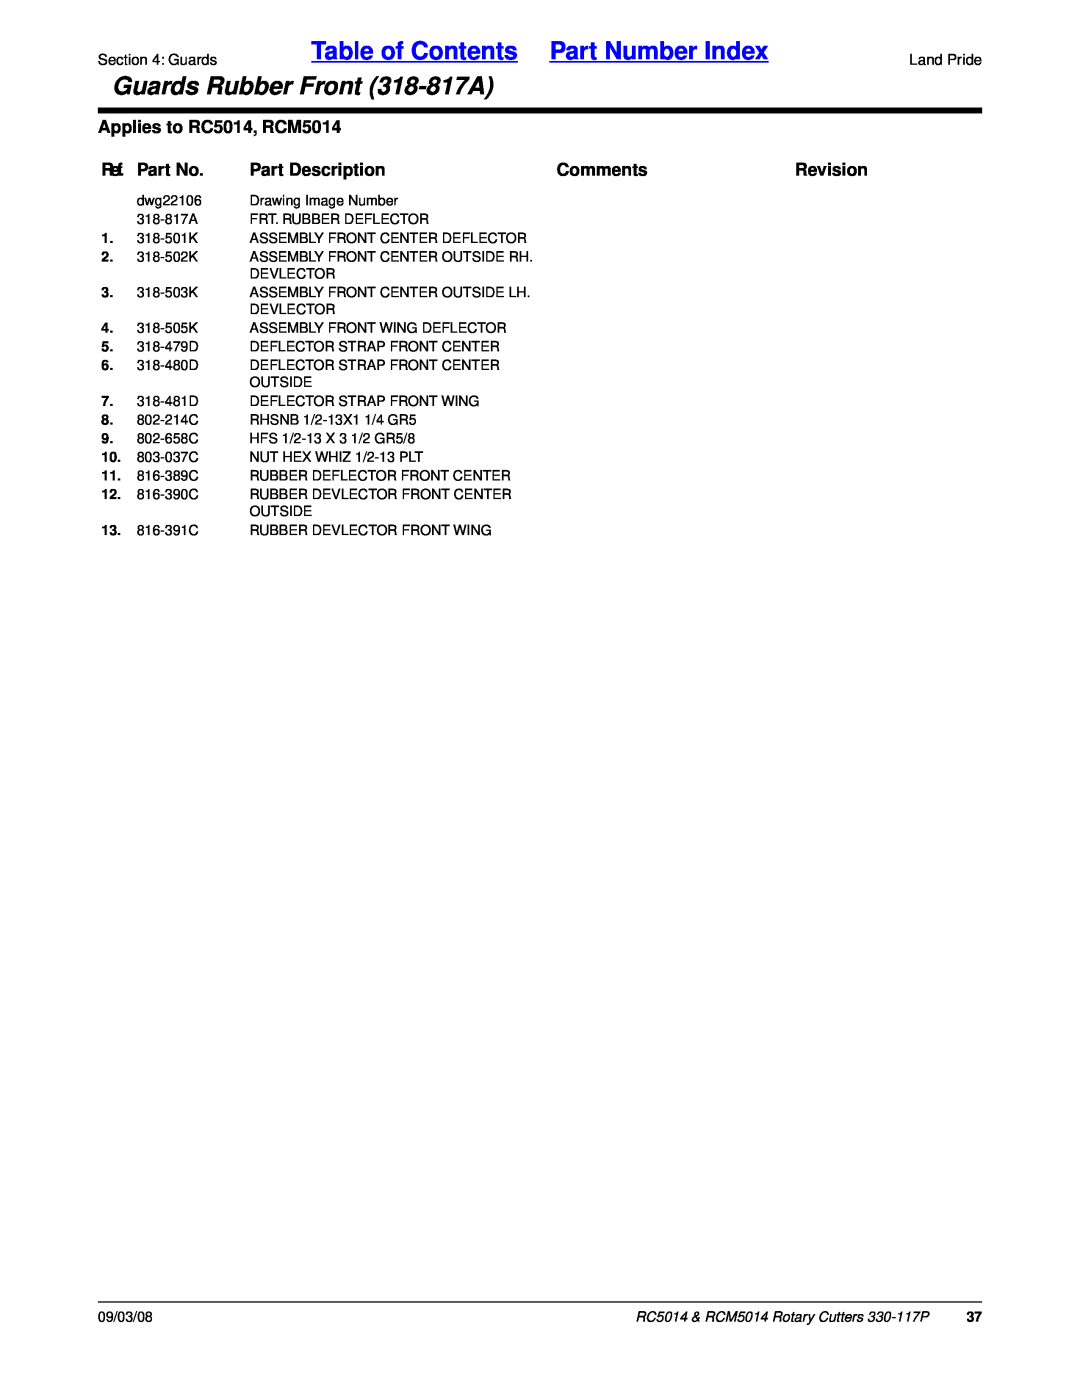 Land Pride Table of Contents Part Number Index, Guards Rubber Front 318-817A, Applies to RC5014, RCM5014, Ref. Part No 